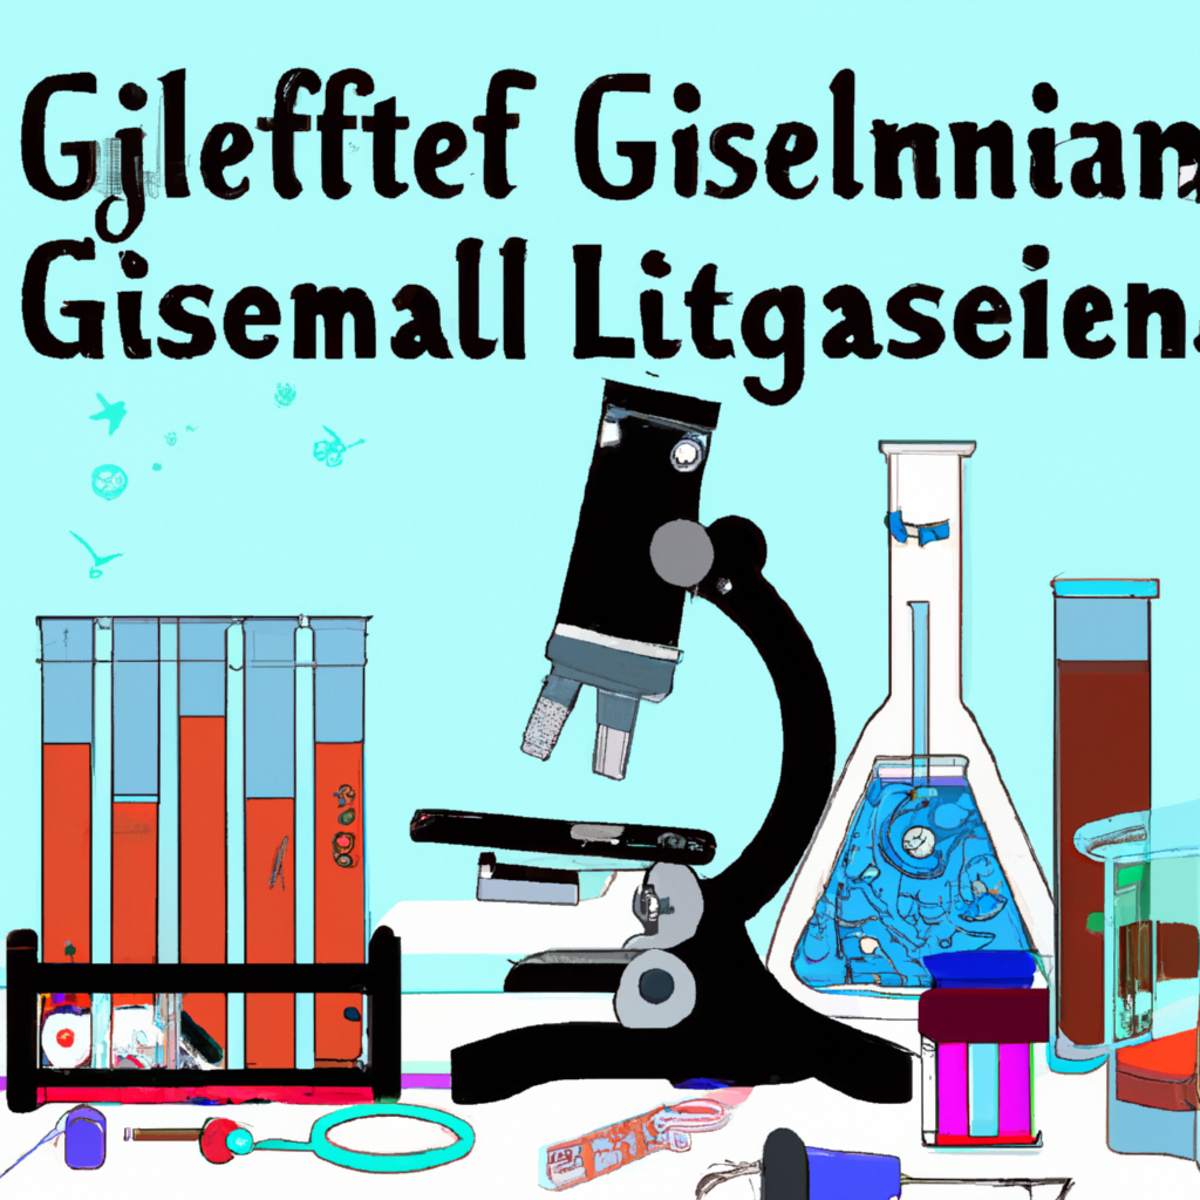 Scientific lab with test tubes, microscopes, and equipment, representing the diagnostic process for Gitelman Syndrome.